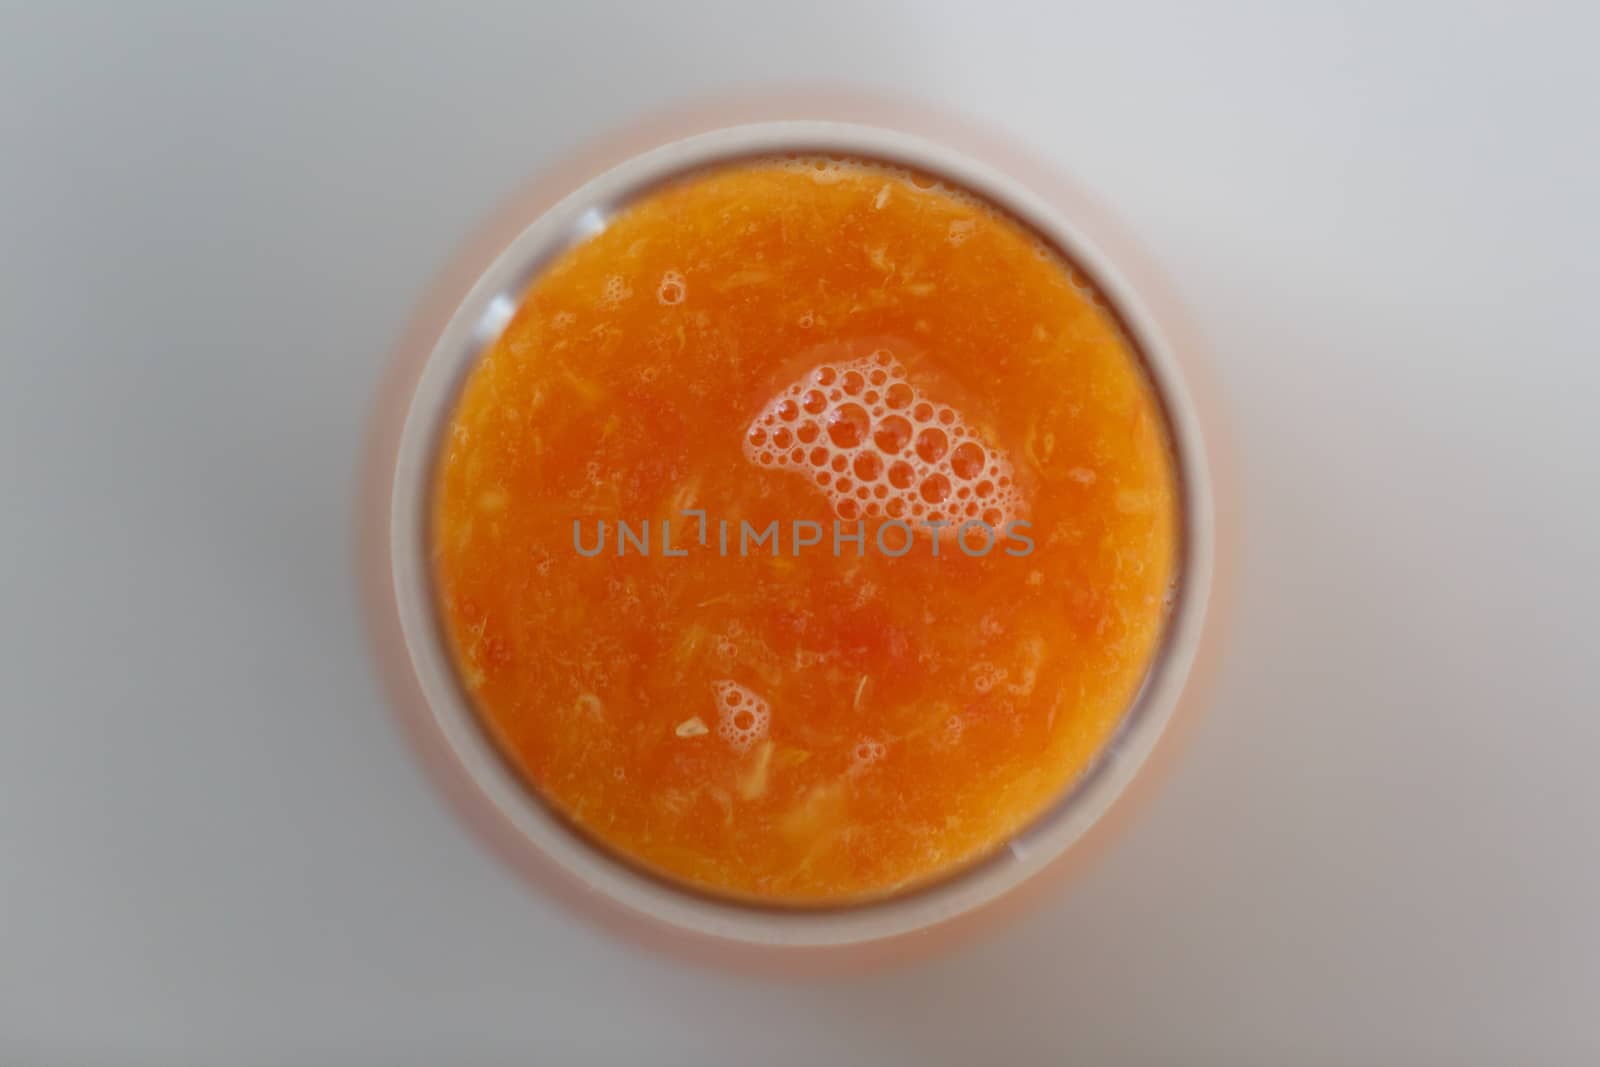 Close up detailed top view of fresh orange juice in a glass